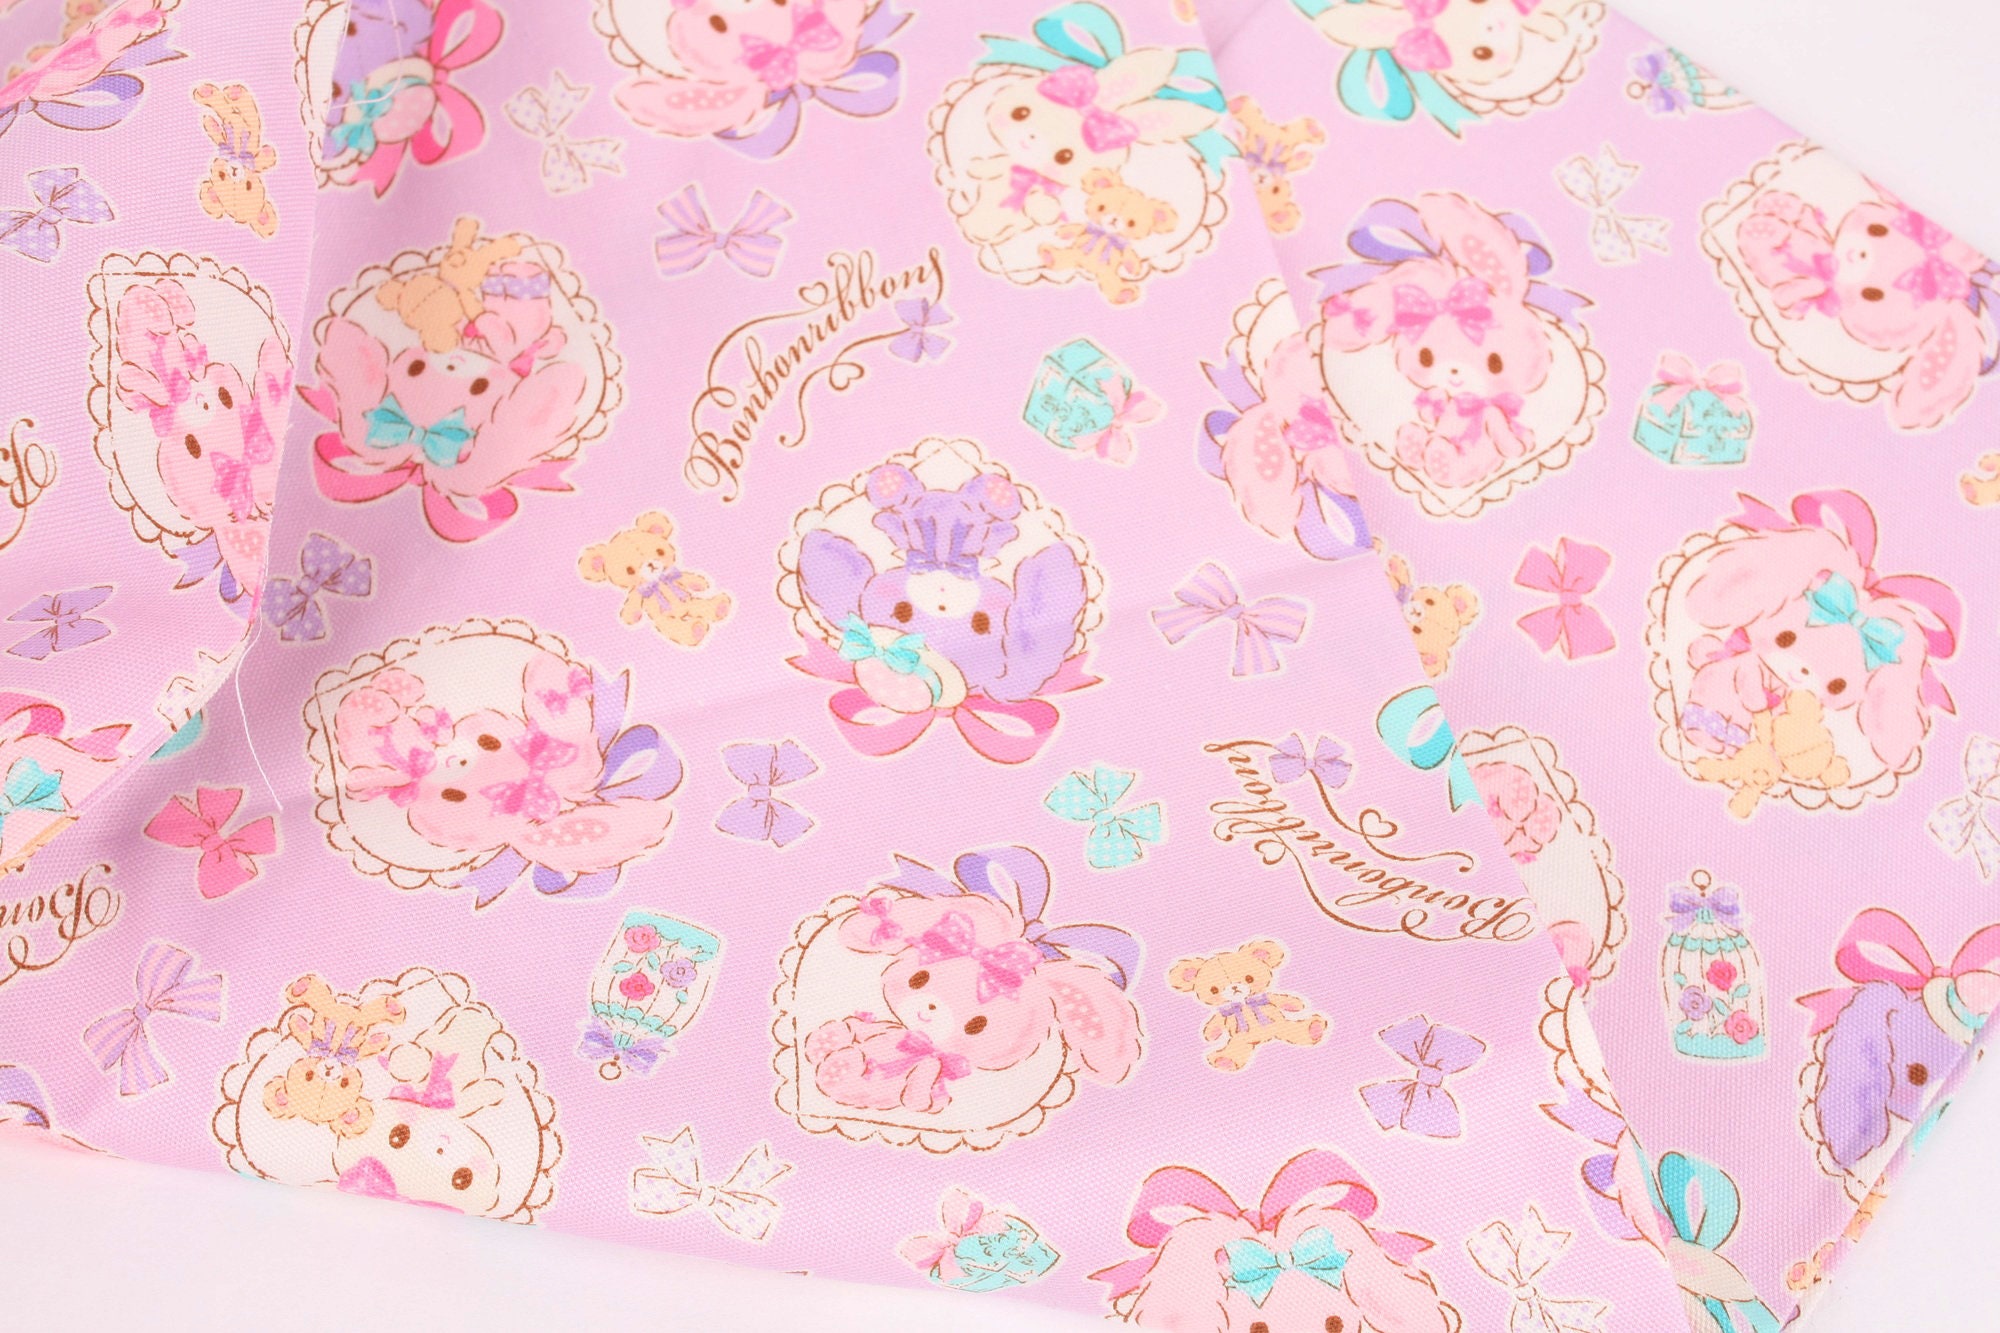 beige packed Sanrio character oxford fabric Fabric by Sanrio - modeS4u